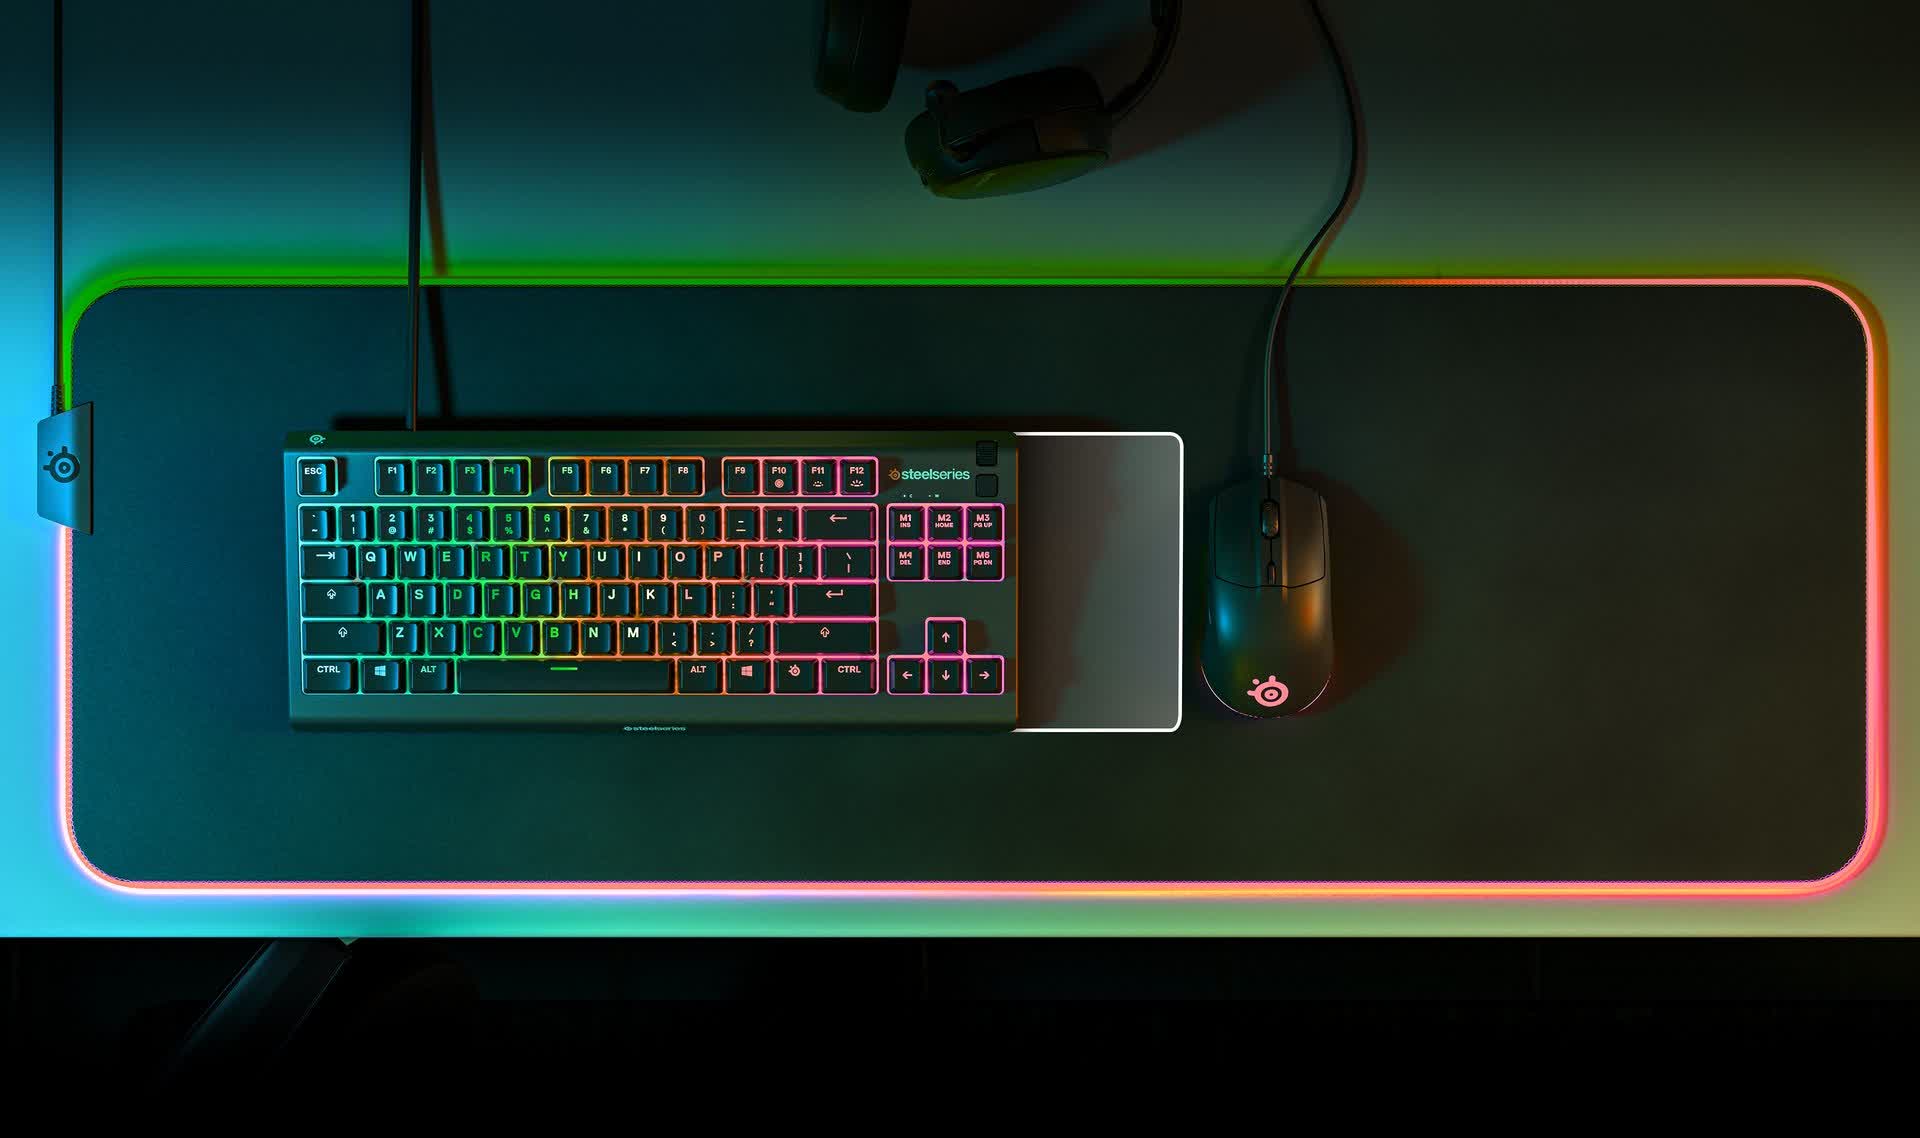 Steelseries launches a TKL version of its water-resistant Apex 3 gaming keyboard